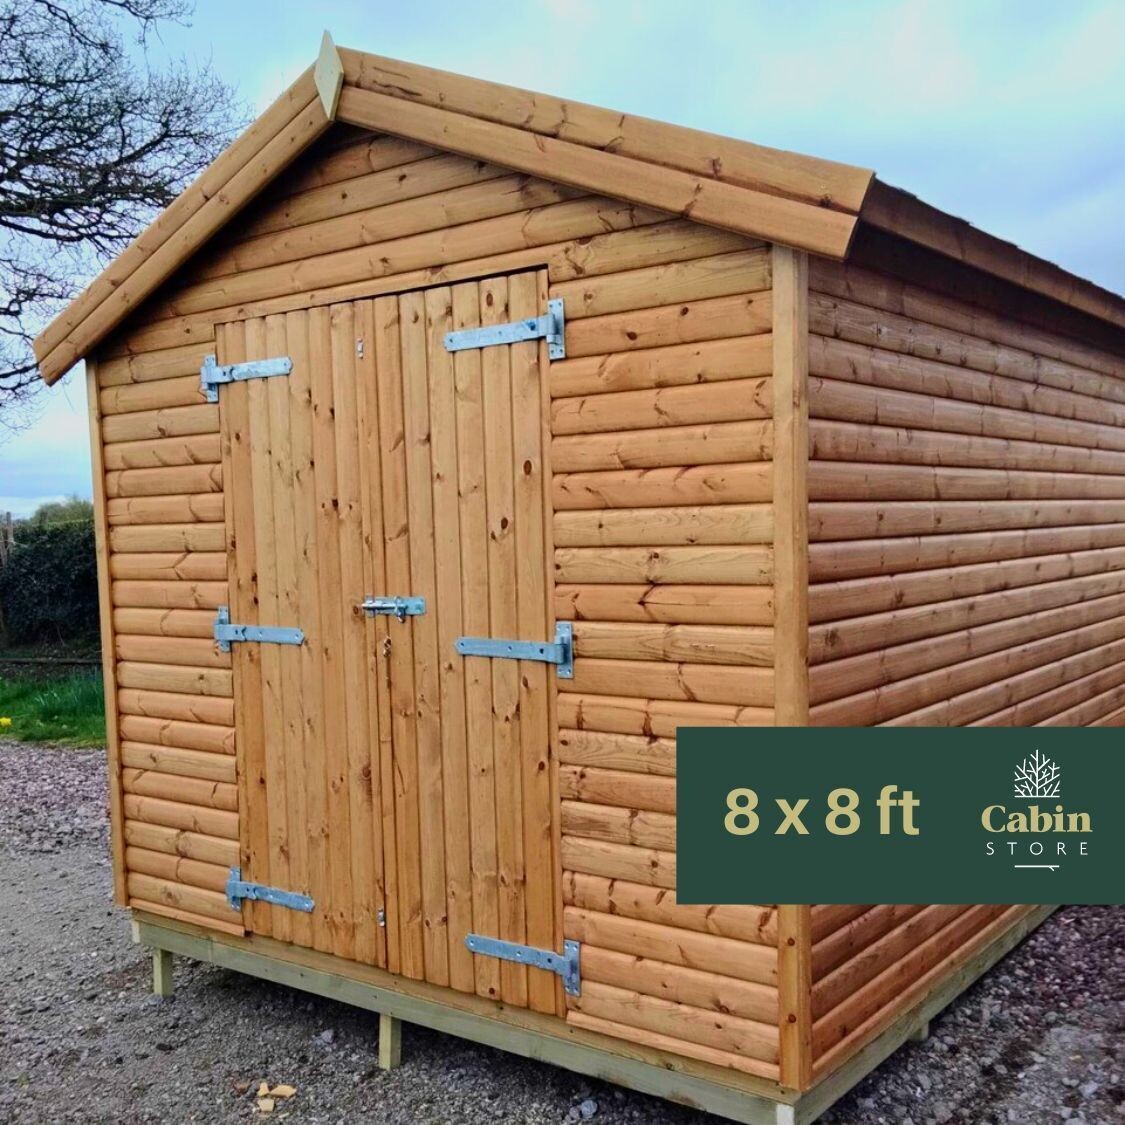 Super Heavy Duty Shed | 8x8ft